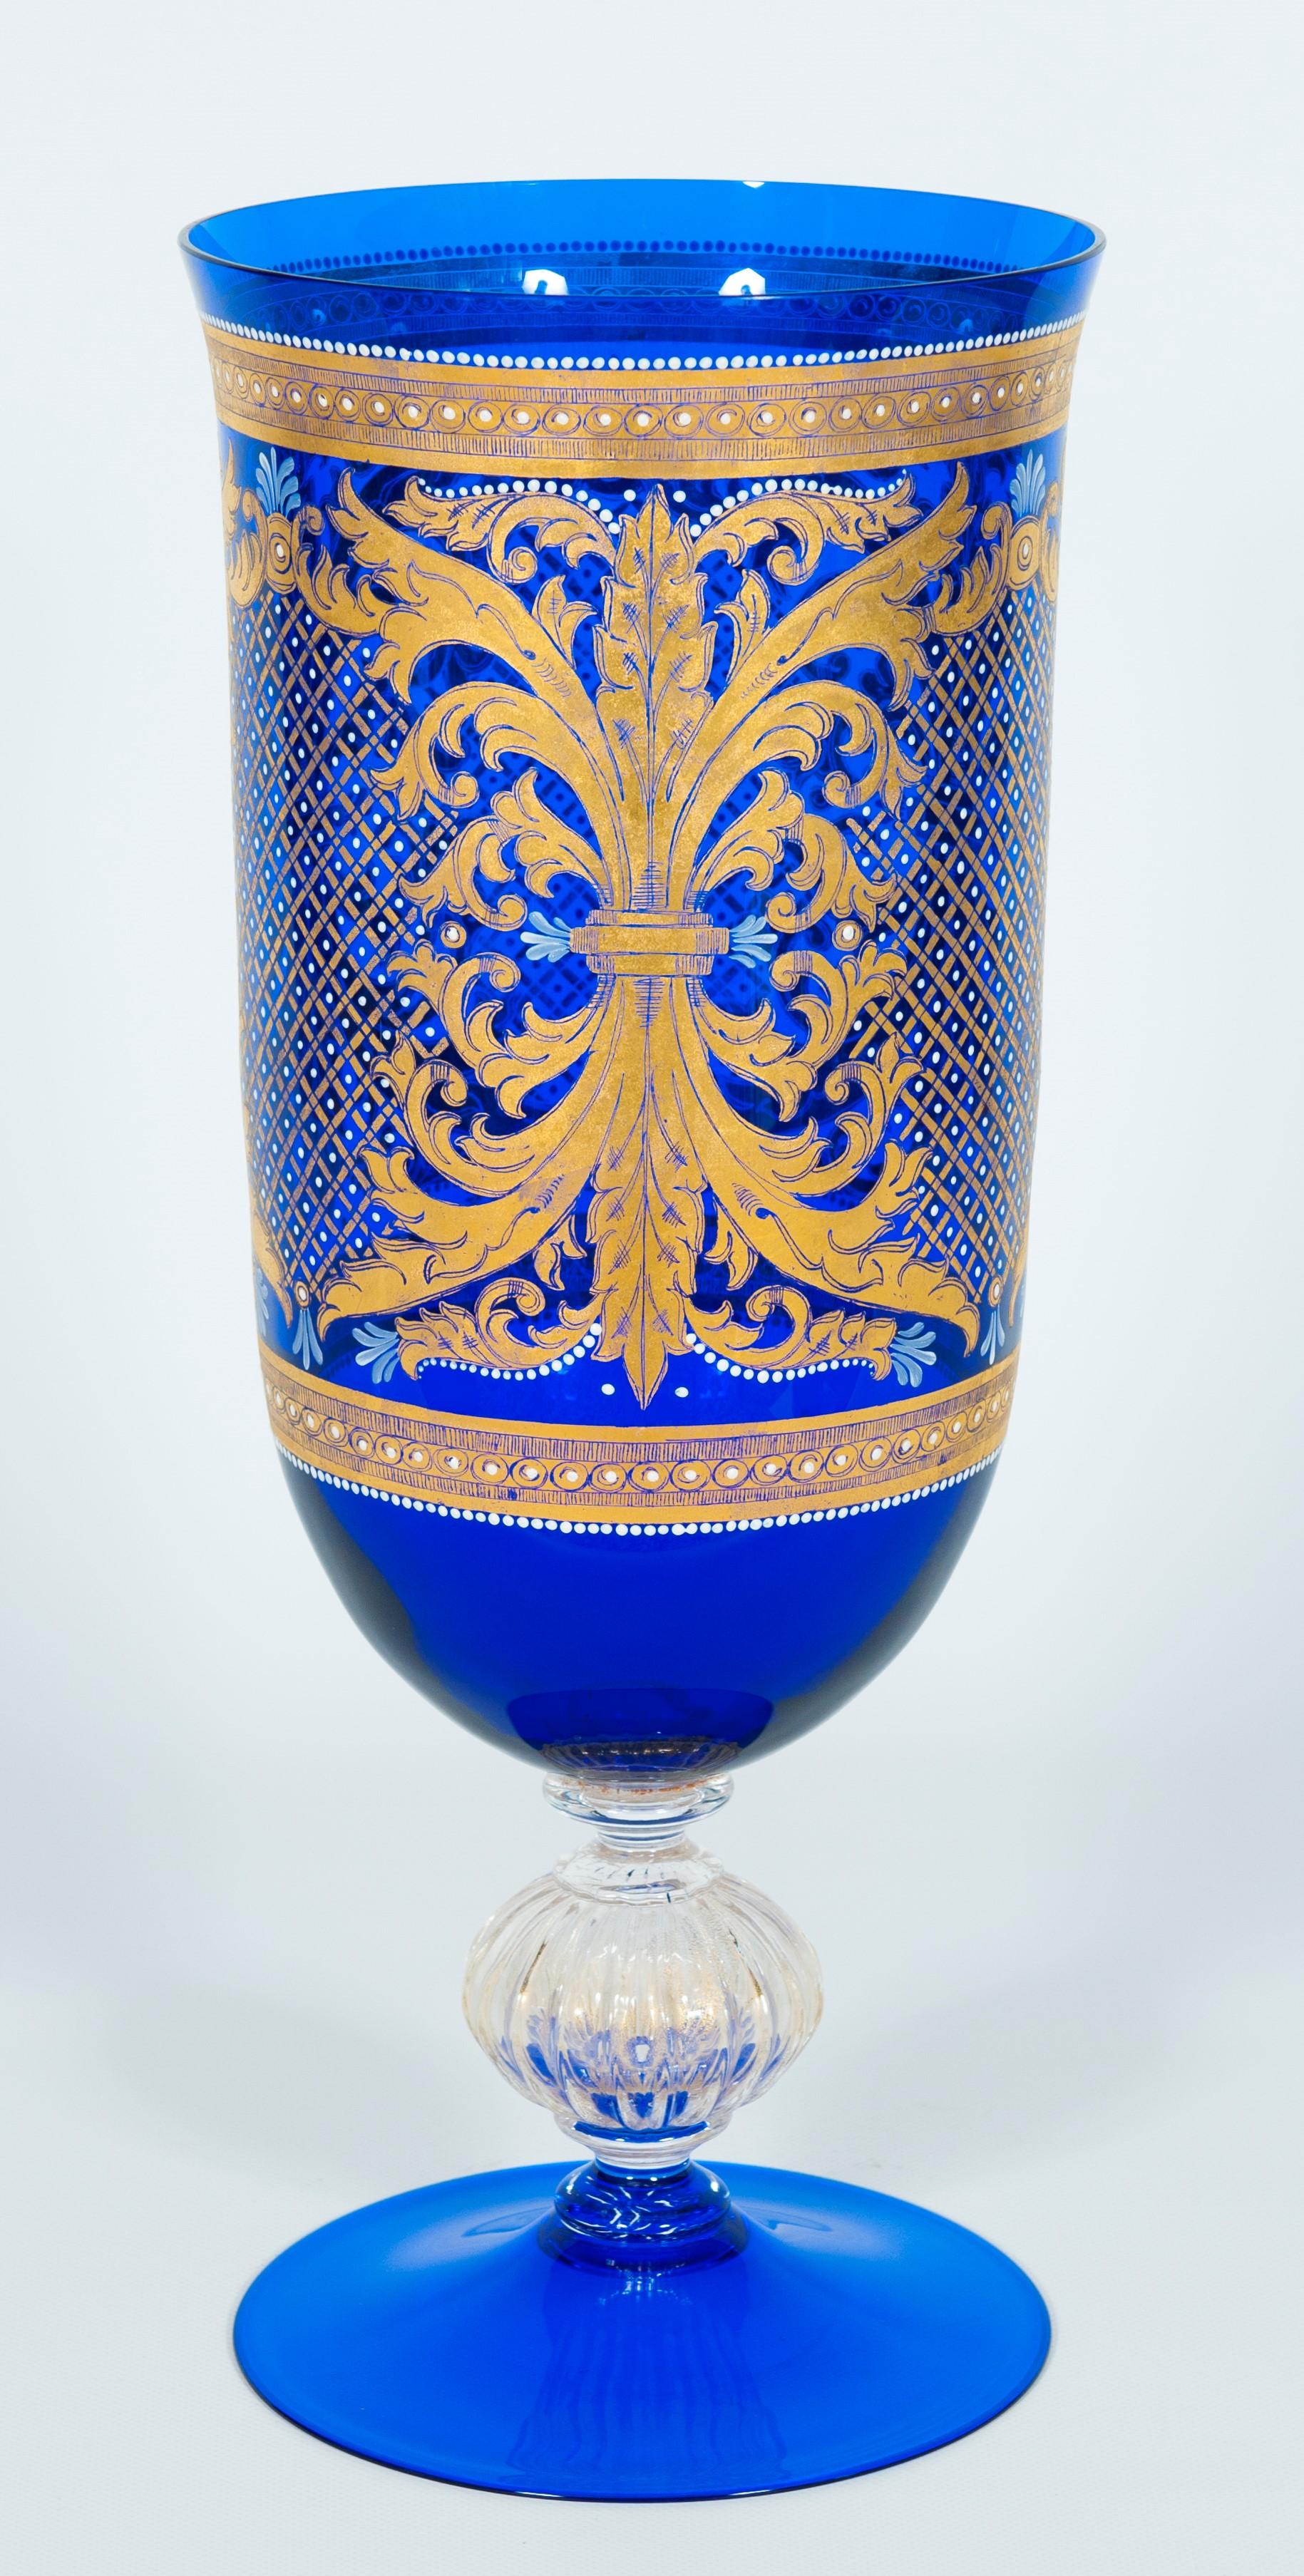 Extra-large Murano glass cup with 24-carat gold decorations, Italy, 1960s.
This enchanting artpiece was entirely handcrafted in the island of Murano in the 1960s, and it is a uniquely refined example of the best Venetian glassblowing tradition. It